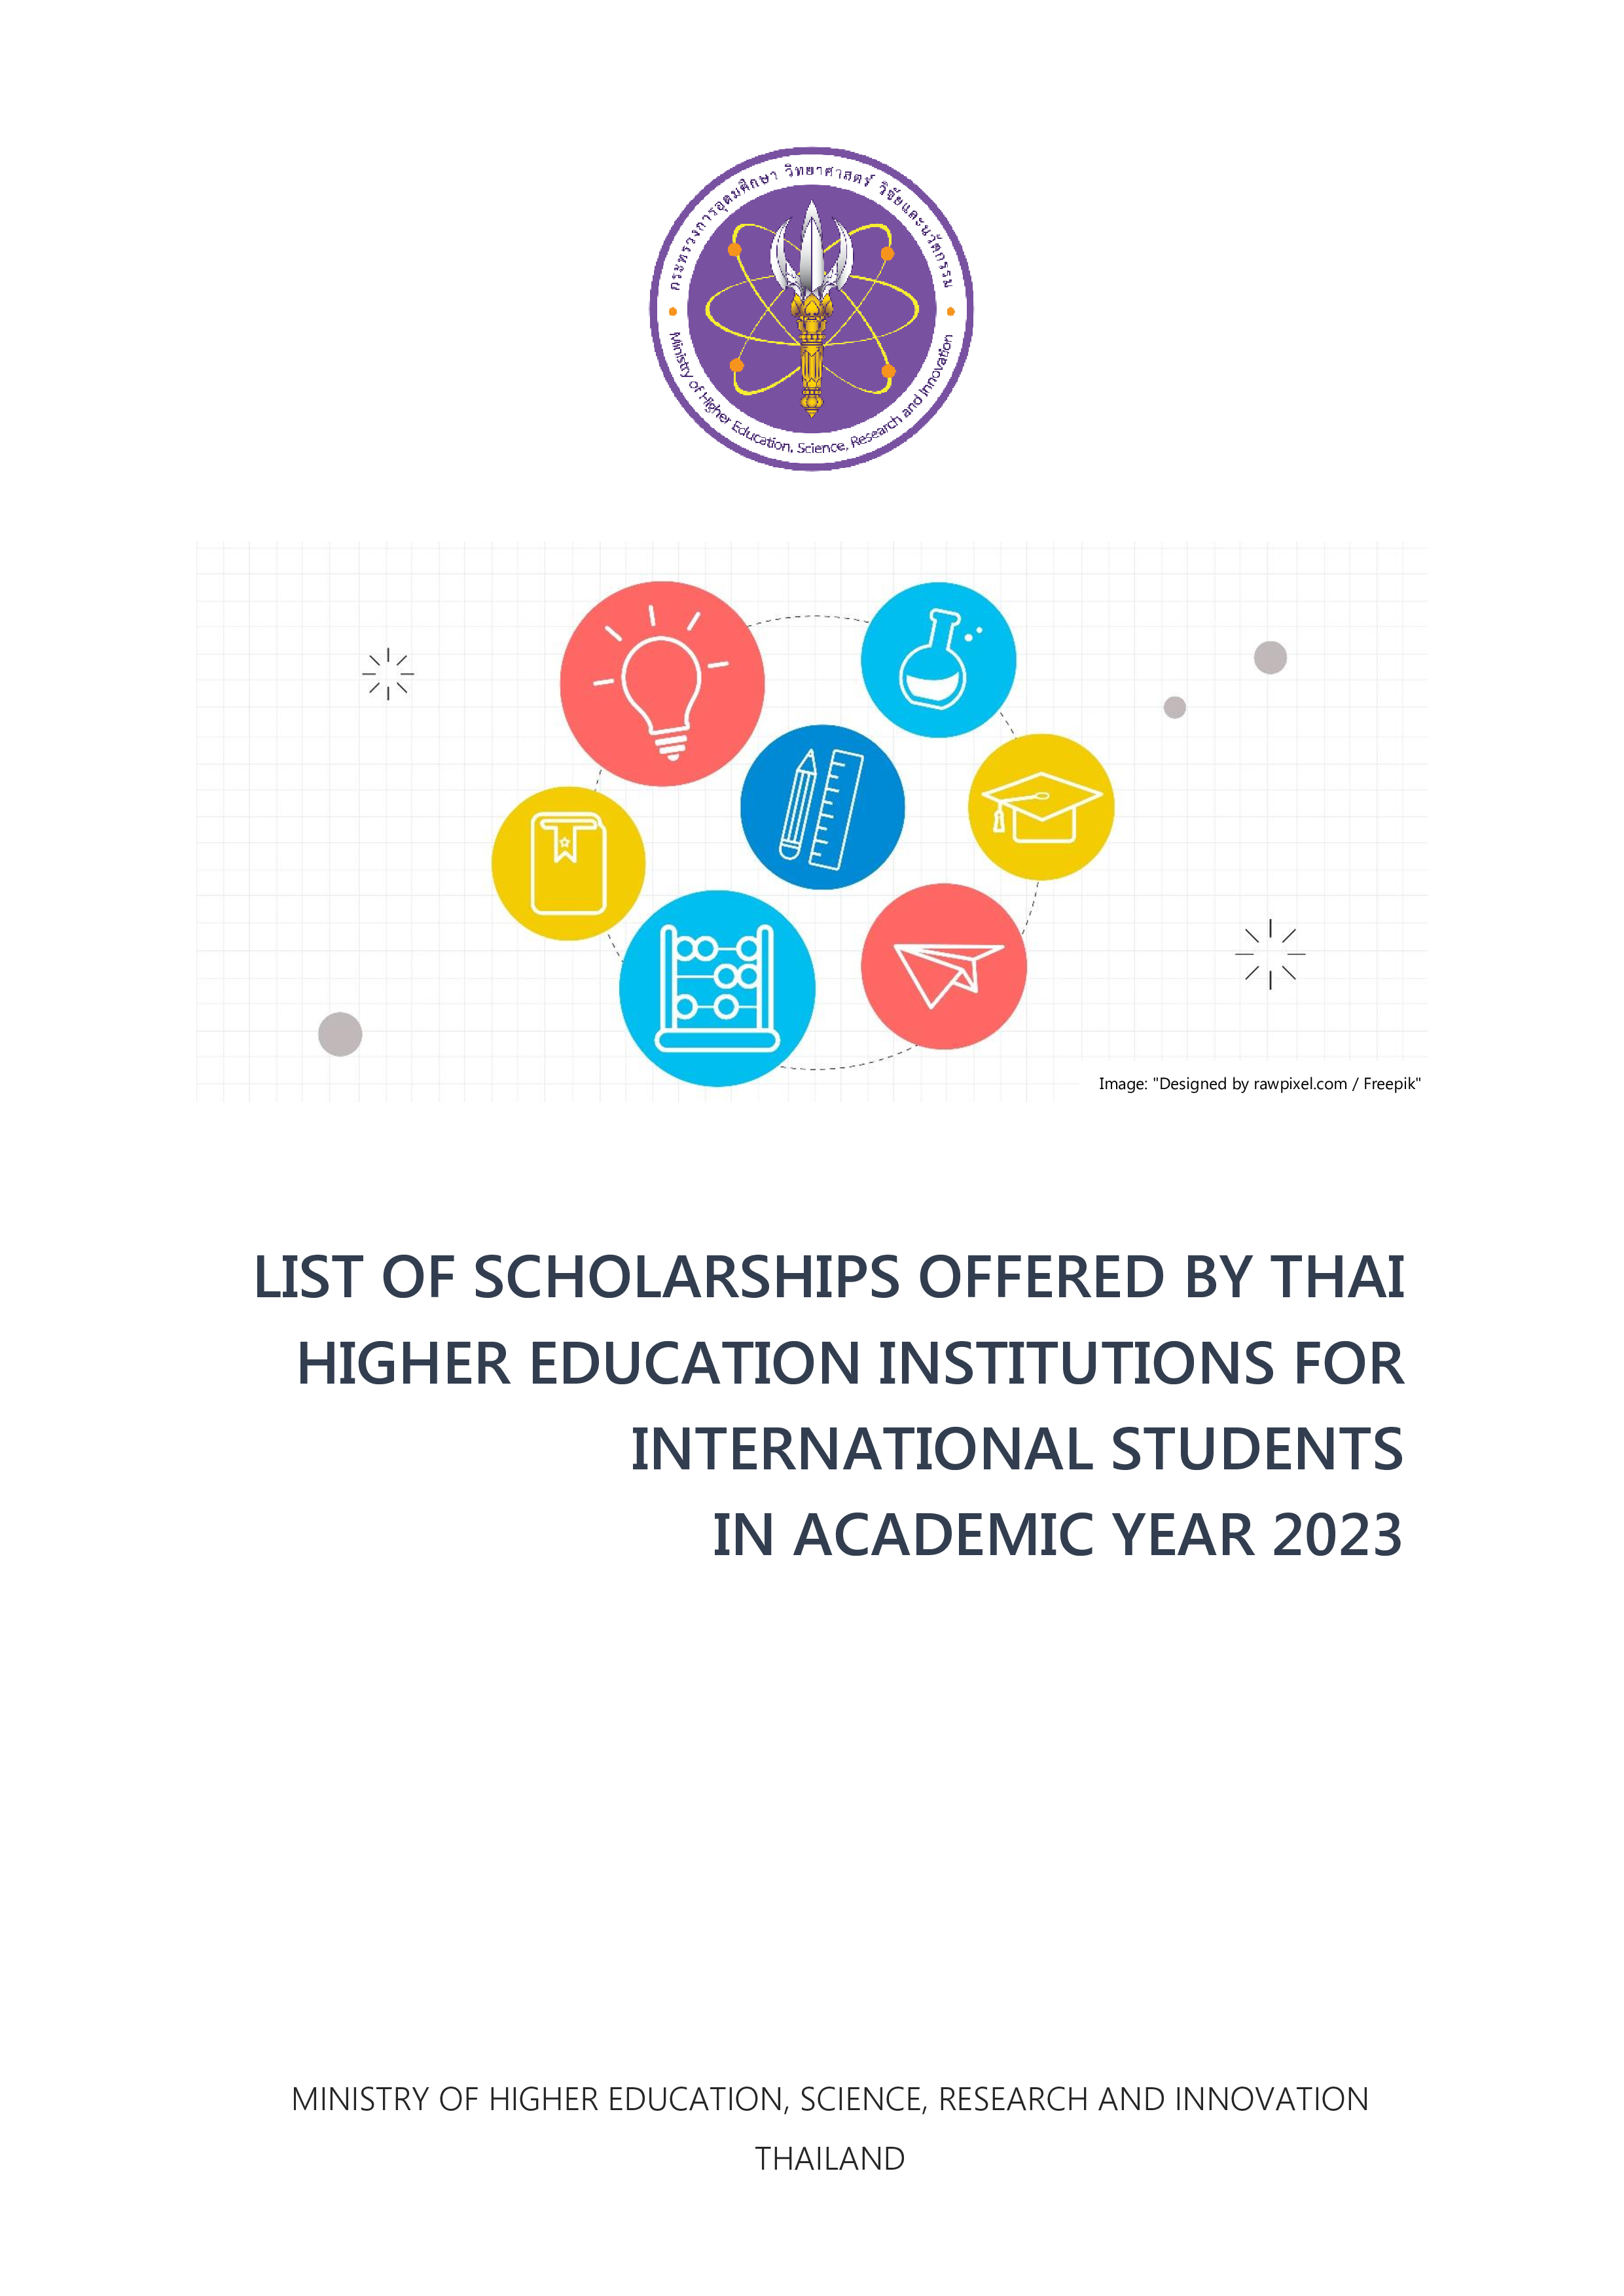 LIST OF SCHOLARSHIPS OFFERED BY THAIHIGHER EDUCATION INSTITUTIONS FOR INTERNATIONAL STUDENTS IN ACADEMIC YEAR 2023